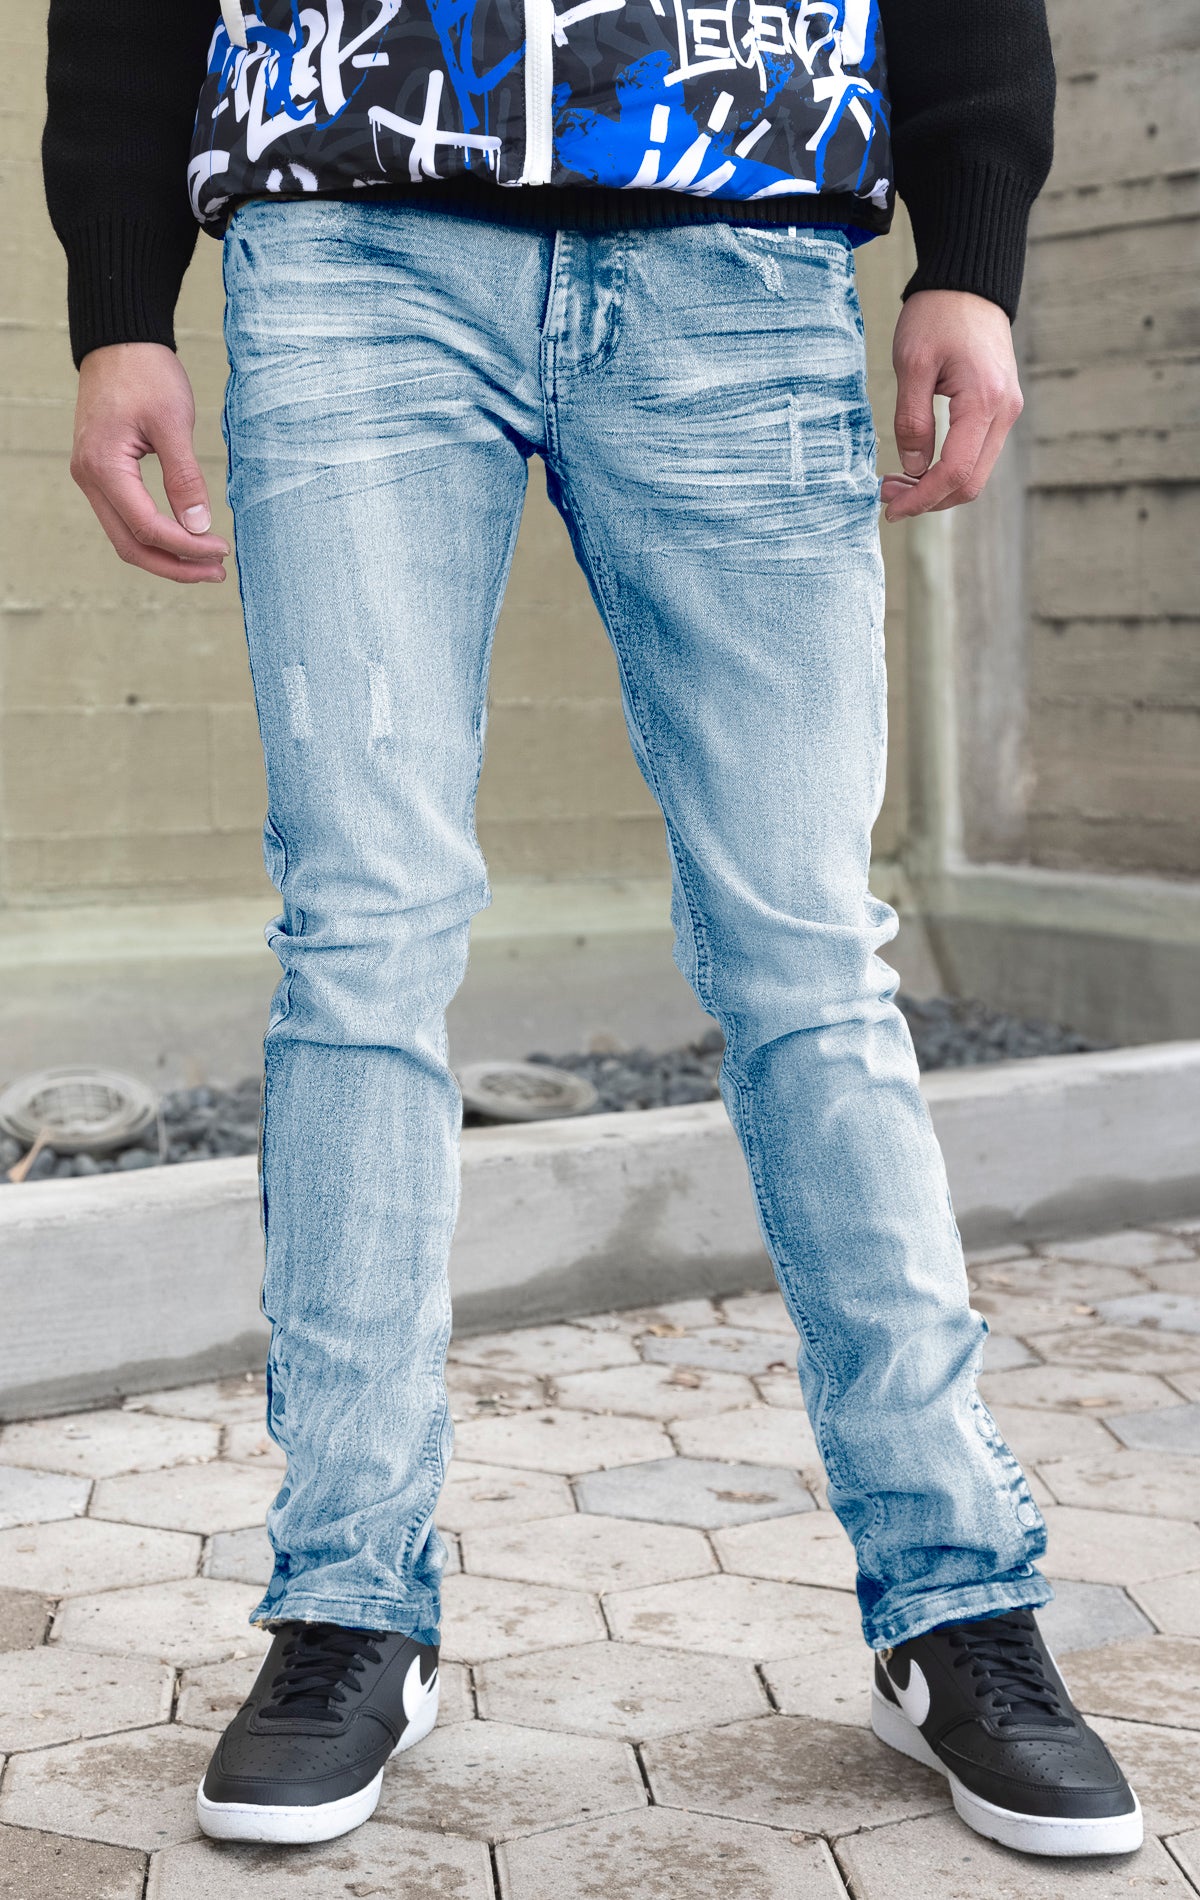 Ice Blue tint denim featuring distressed detailing throughout, a skinny fit, stretch denim, and a buttoned flare.